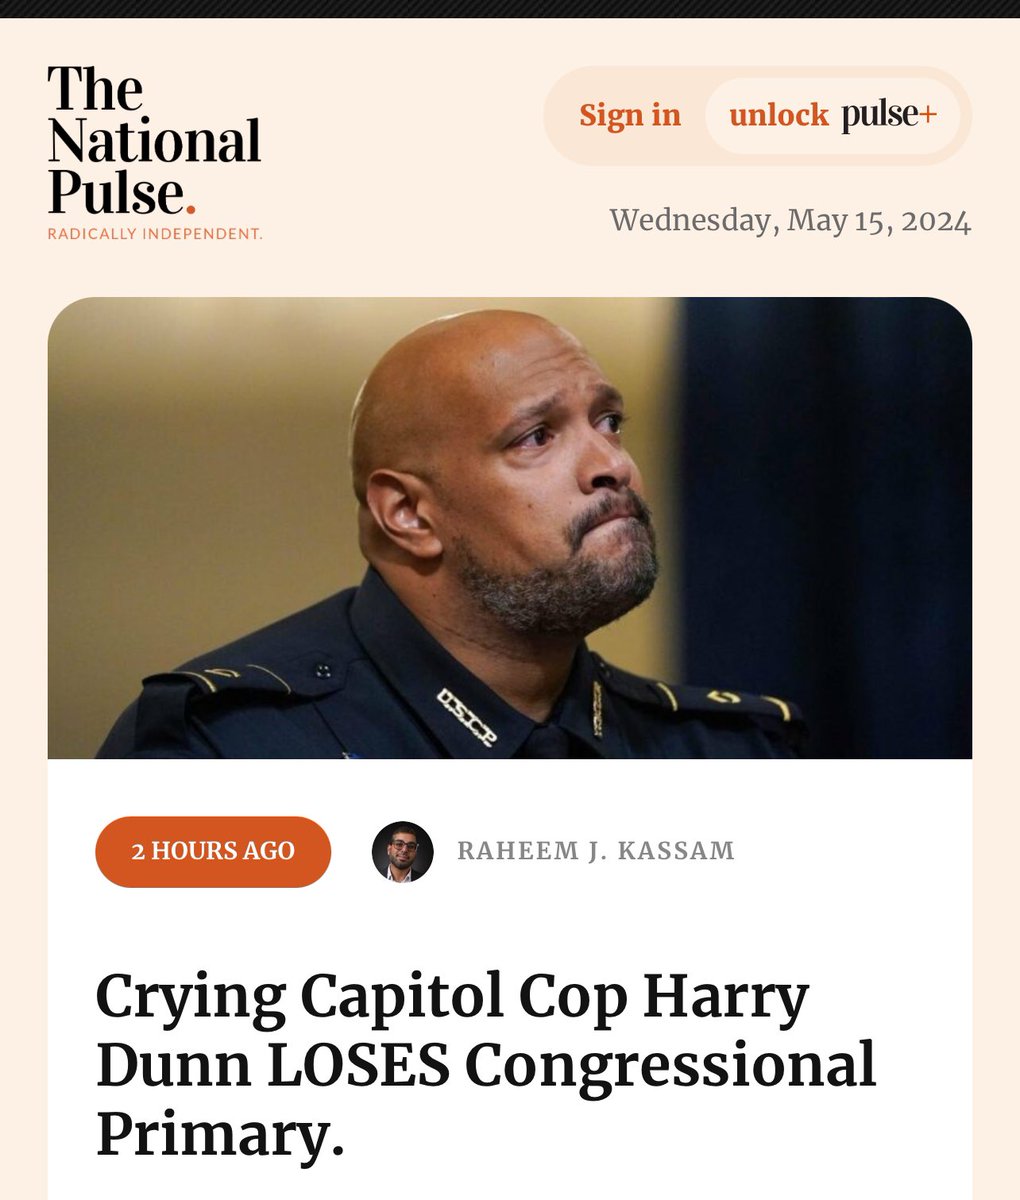 Harry Dunn — the far left Capitol Hill police officer who has cried repeatedly in public over his role in January 6th — has lost his Congressional primary. It is unknown as to whether or not he cried upon hearing the news

Dunn had the endorsements of Nancy Pelosi, Adam Schiff &